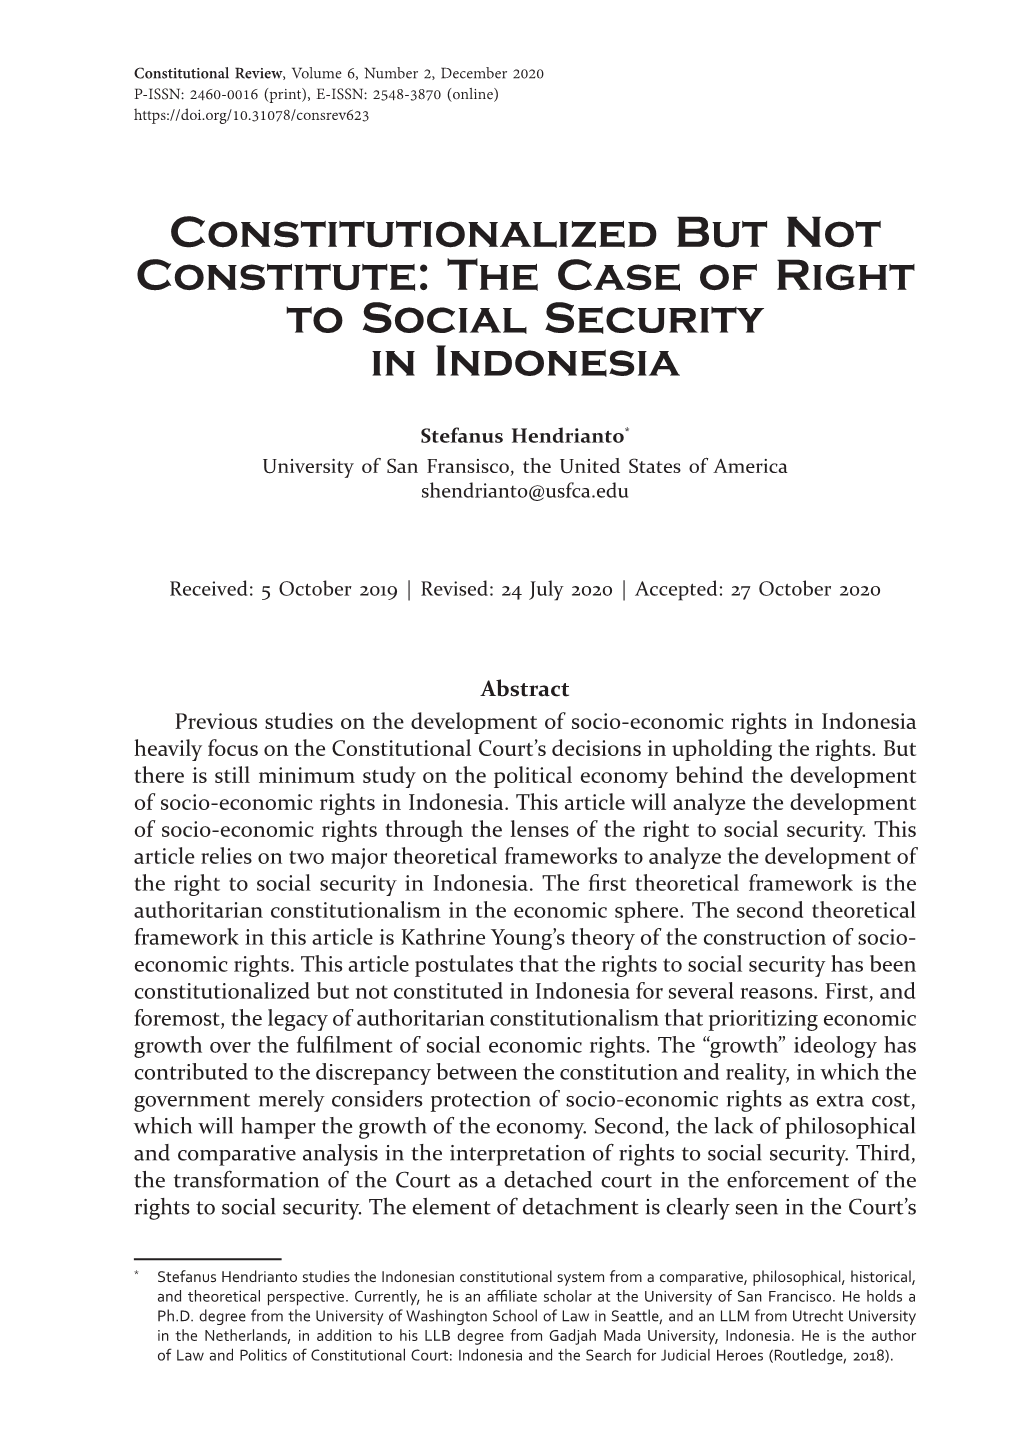 Constitutionalized but Not Constitute: the Case of Right to Social Security in Indonesia